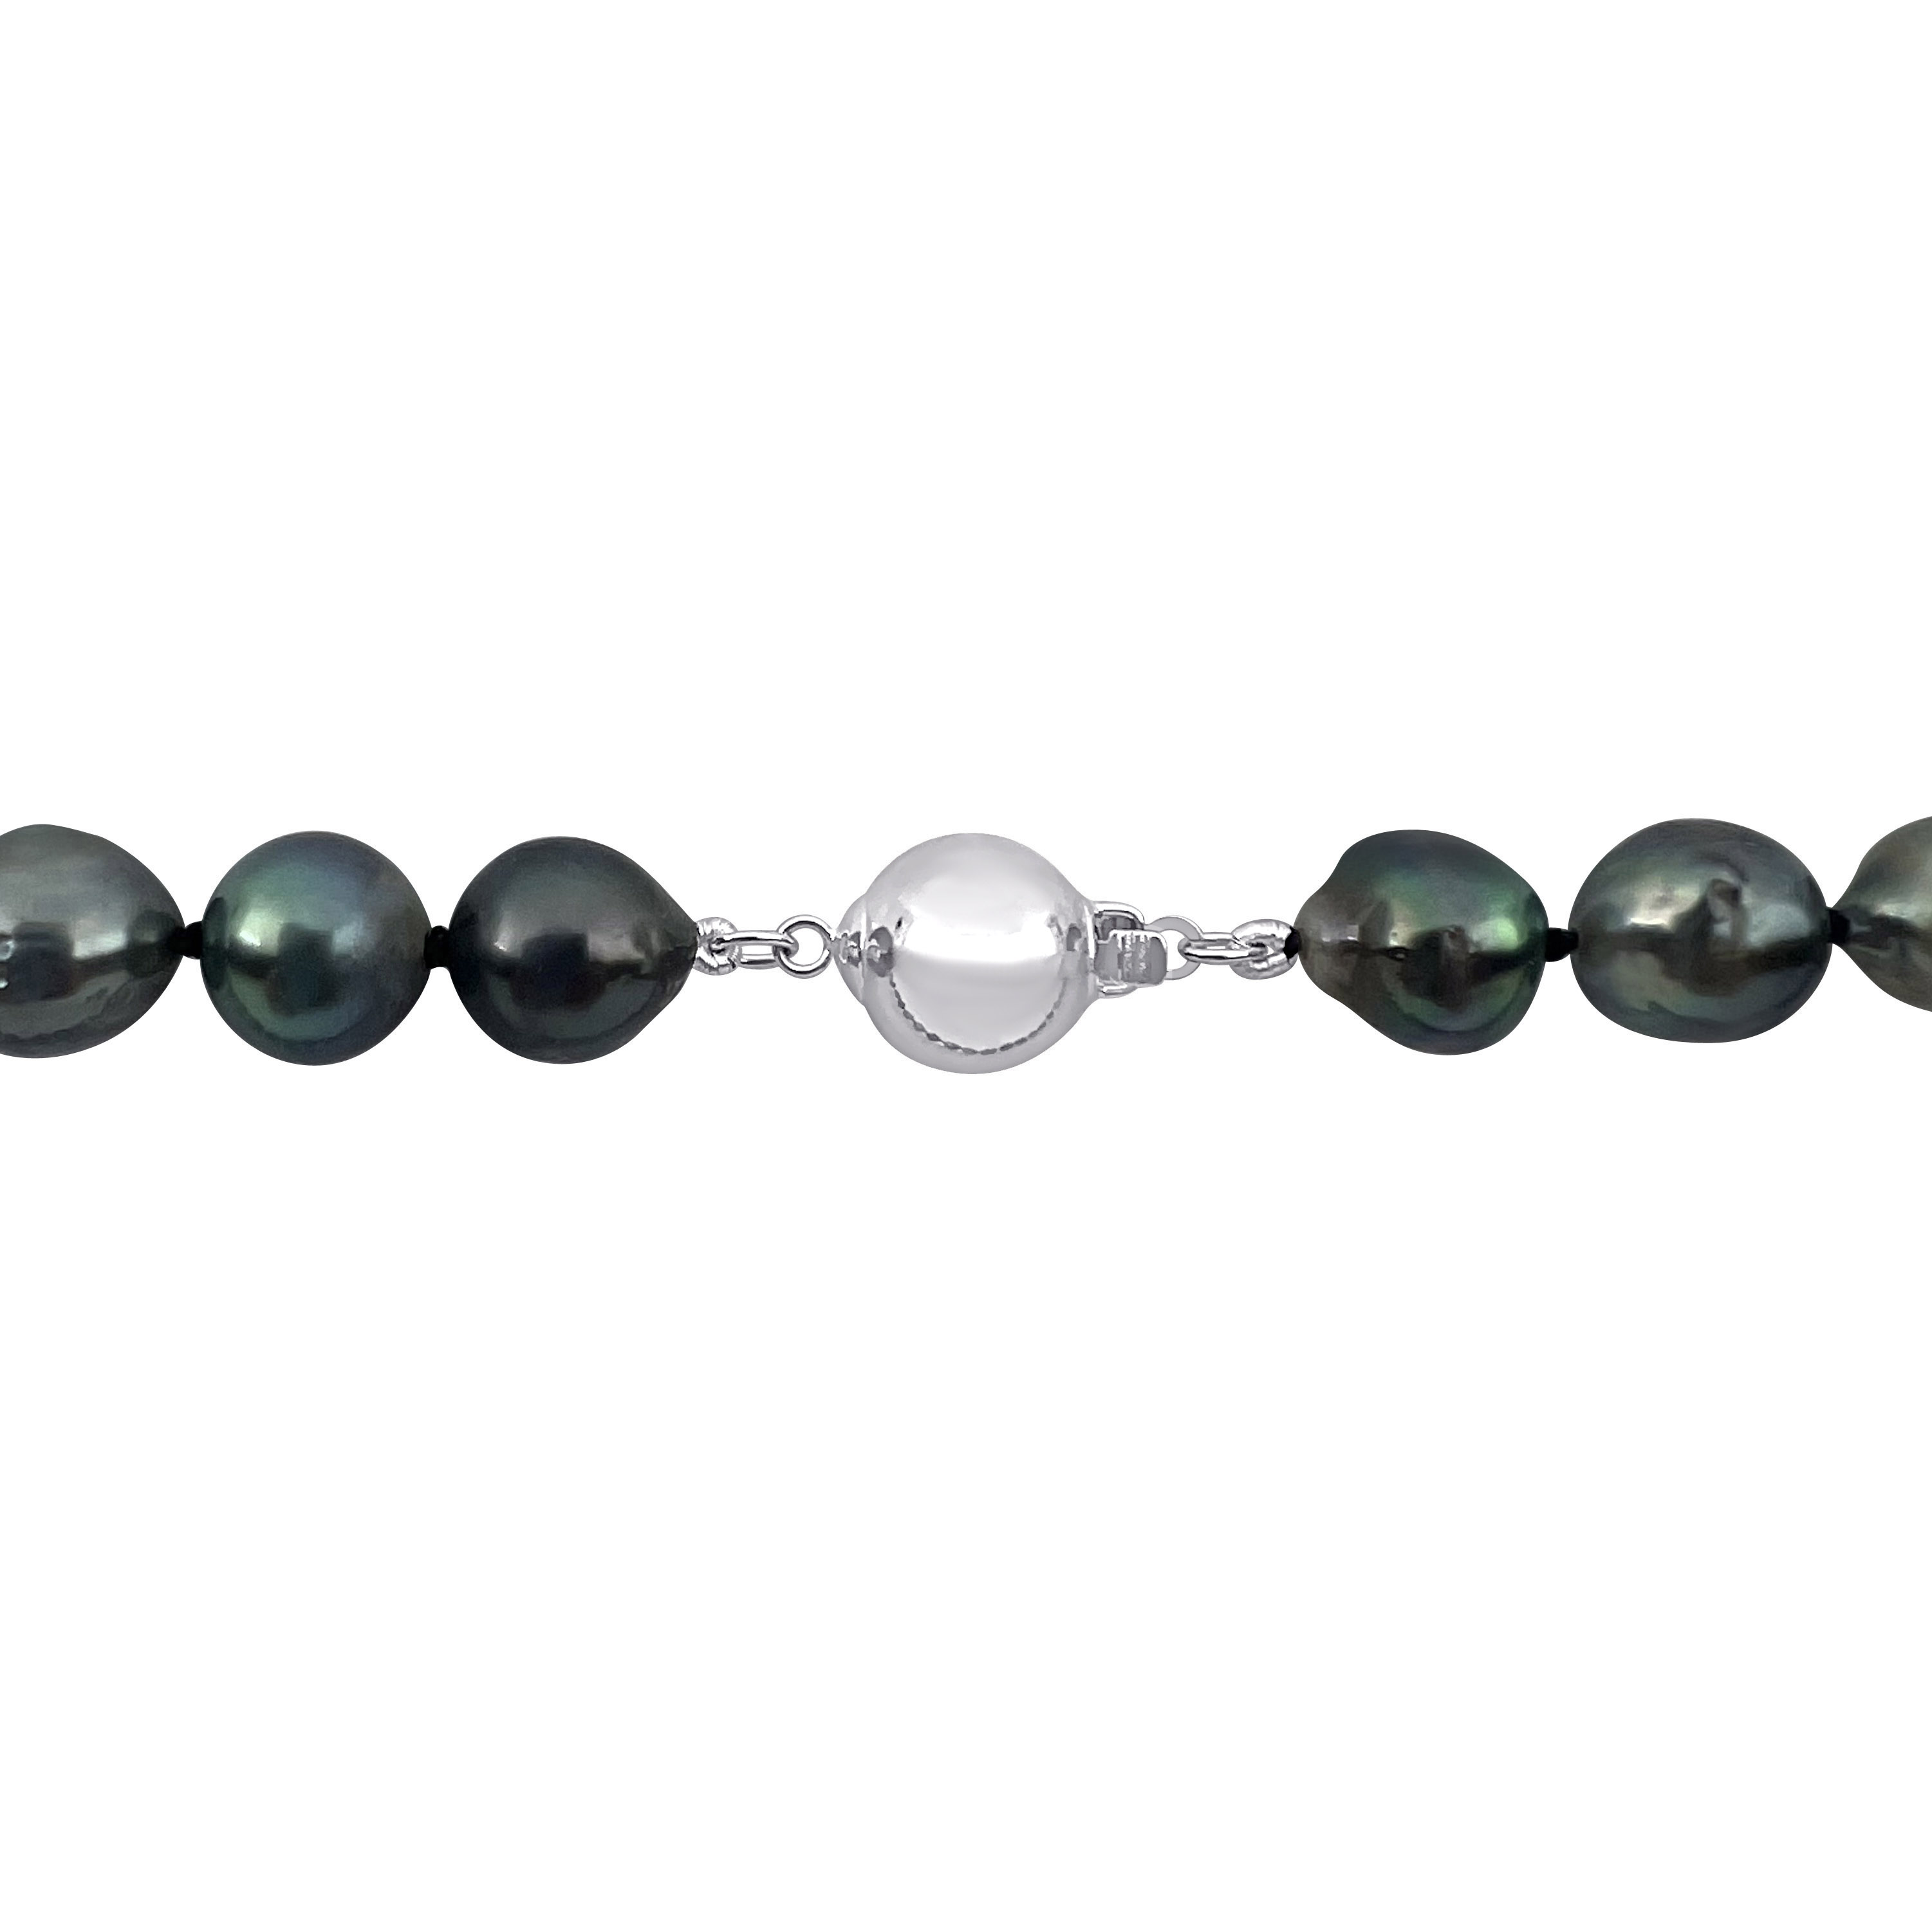 8-10 MM Black Tahitian Cultured Pearl Necklace in Sterling Silver - 18 in